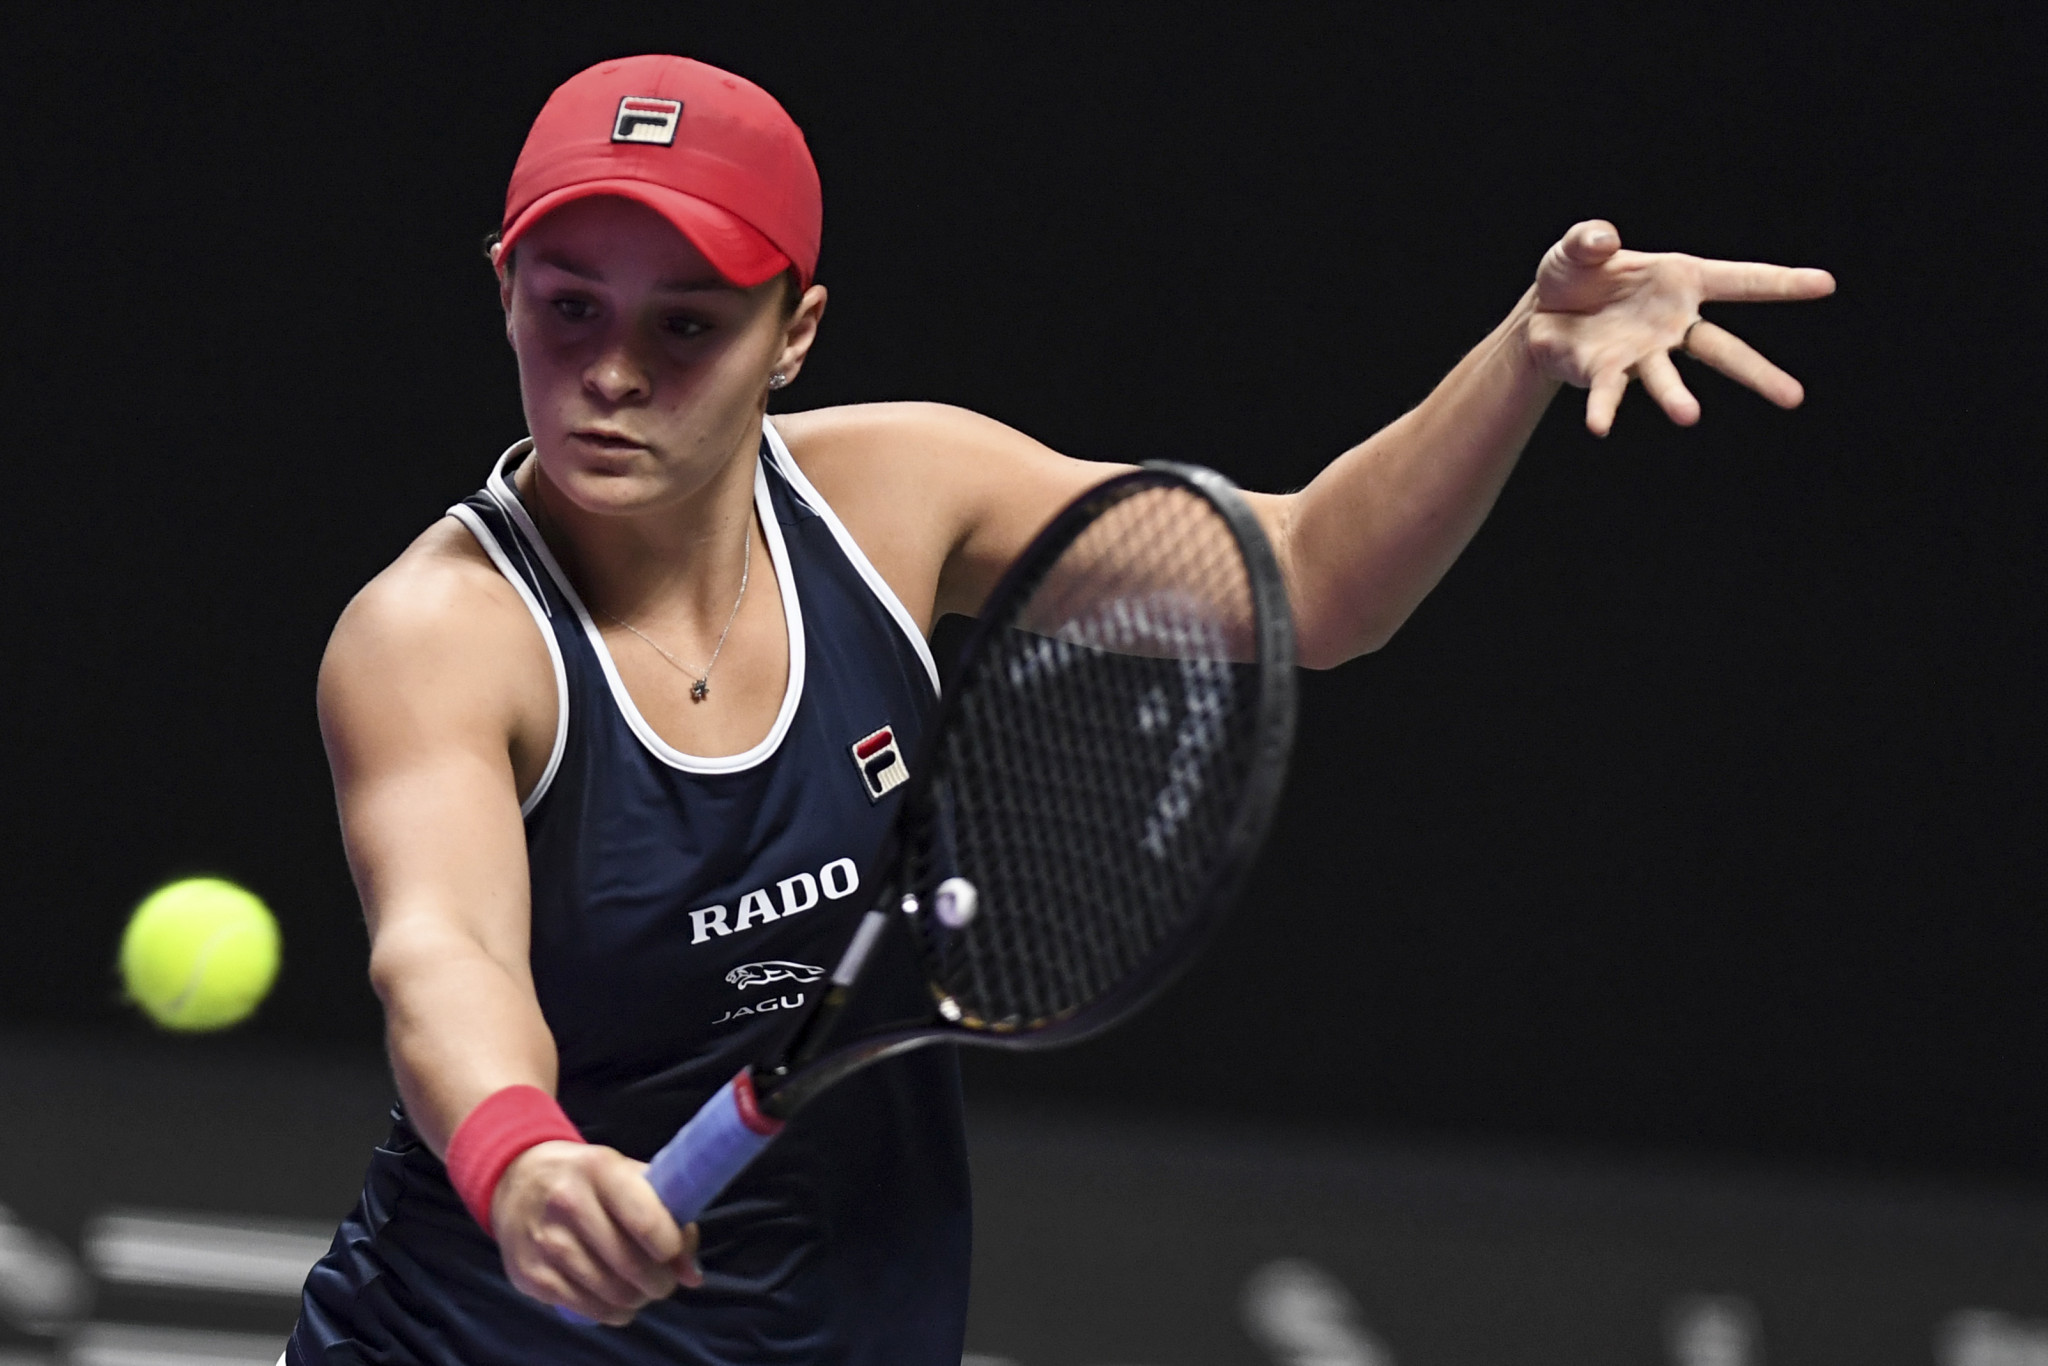 World number one Barty wins opening match at WTA Finals